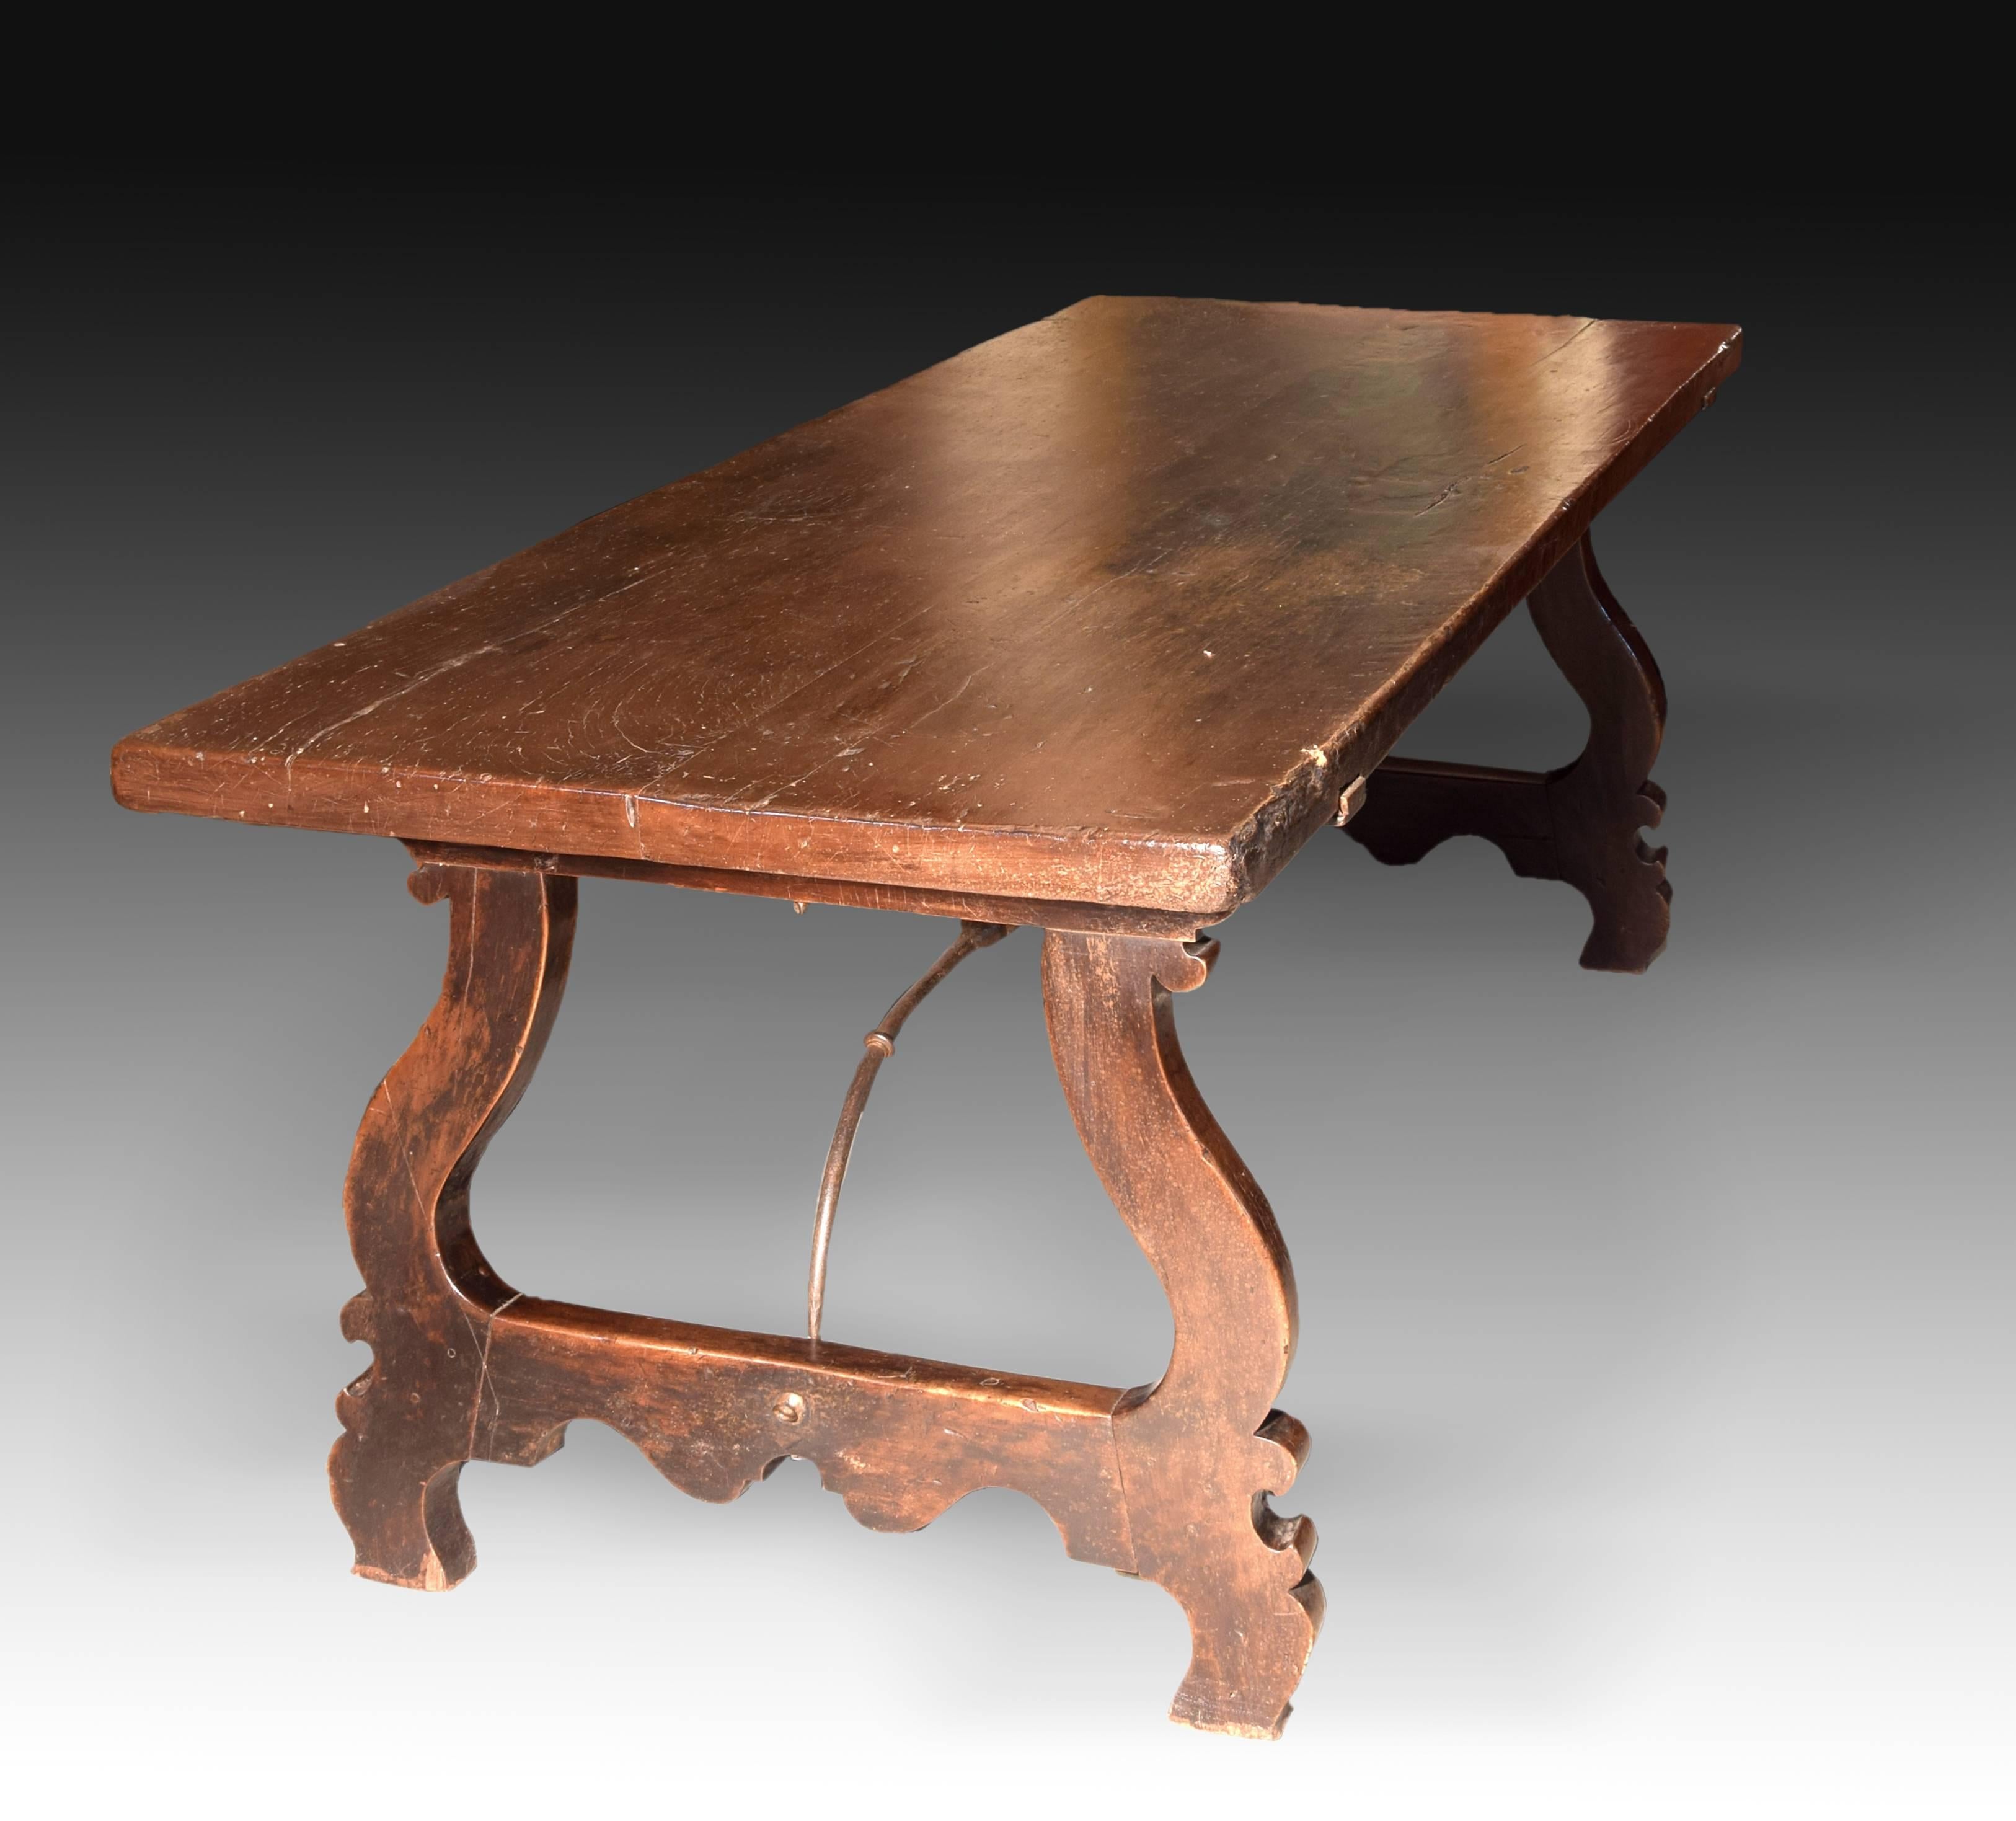 Walnut was the most frequently used in the furniture of the time in Spain, and its forms also respond to this source. Although their presence was frequent in houses of a certain level, not many examples have been preserved because of the changes in